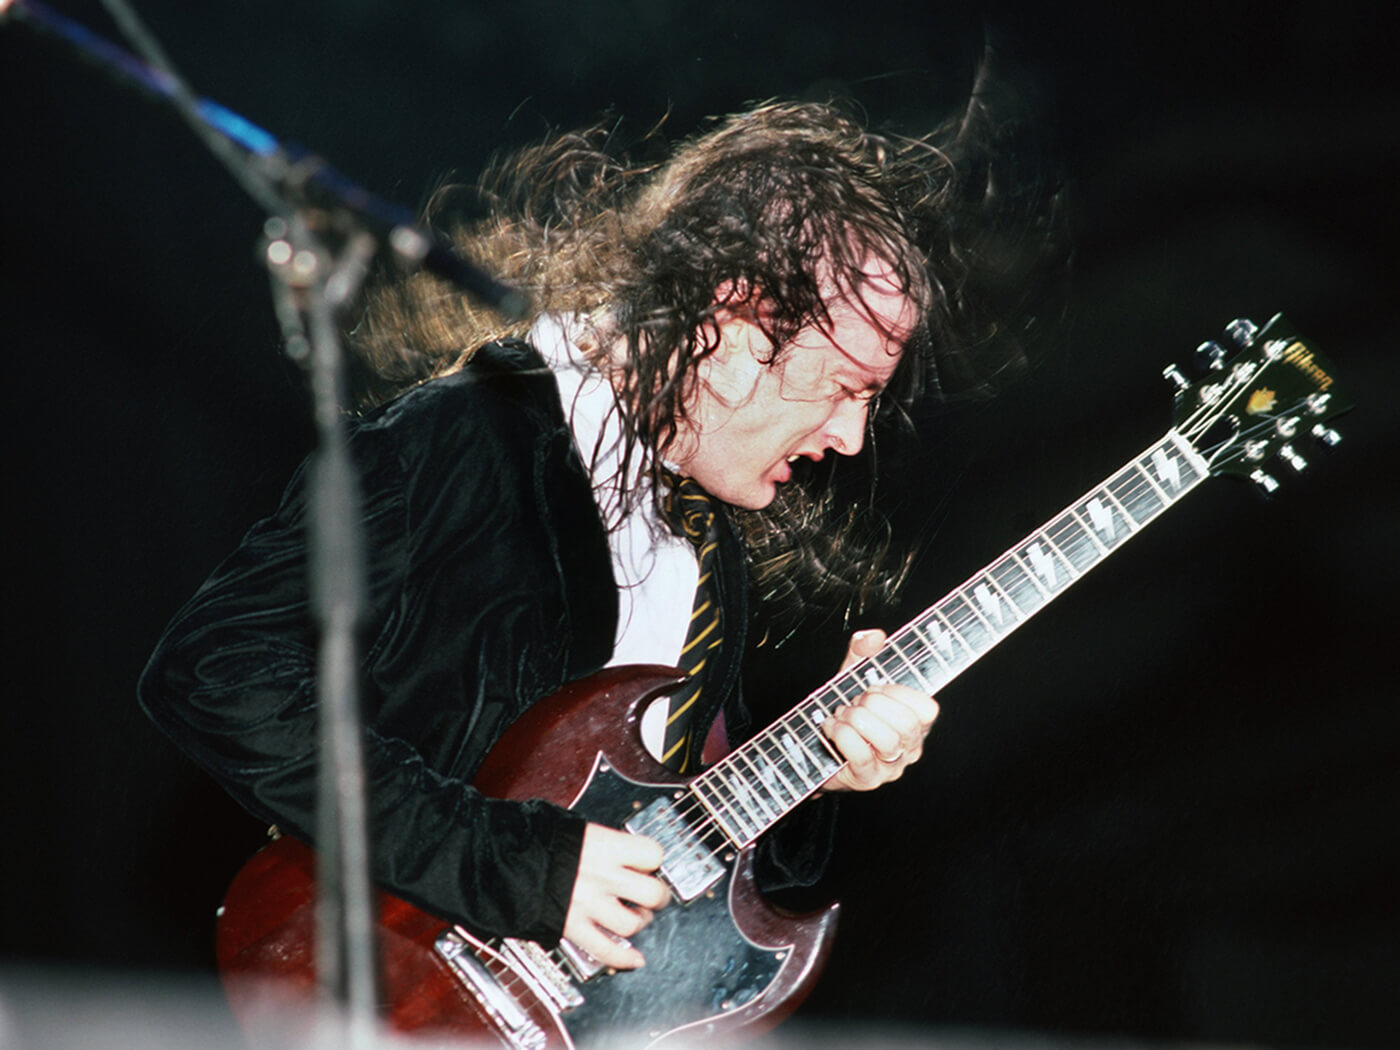 Angus Young of AC/DC shredding on a Gibson SG with lightning inlays by Michael Ochs Archives/Getty Images